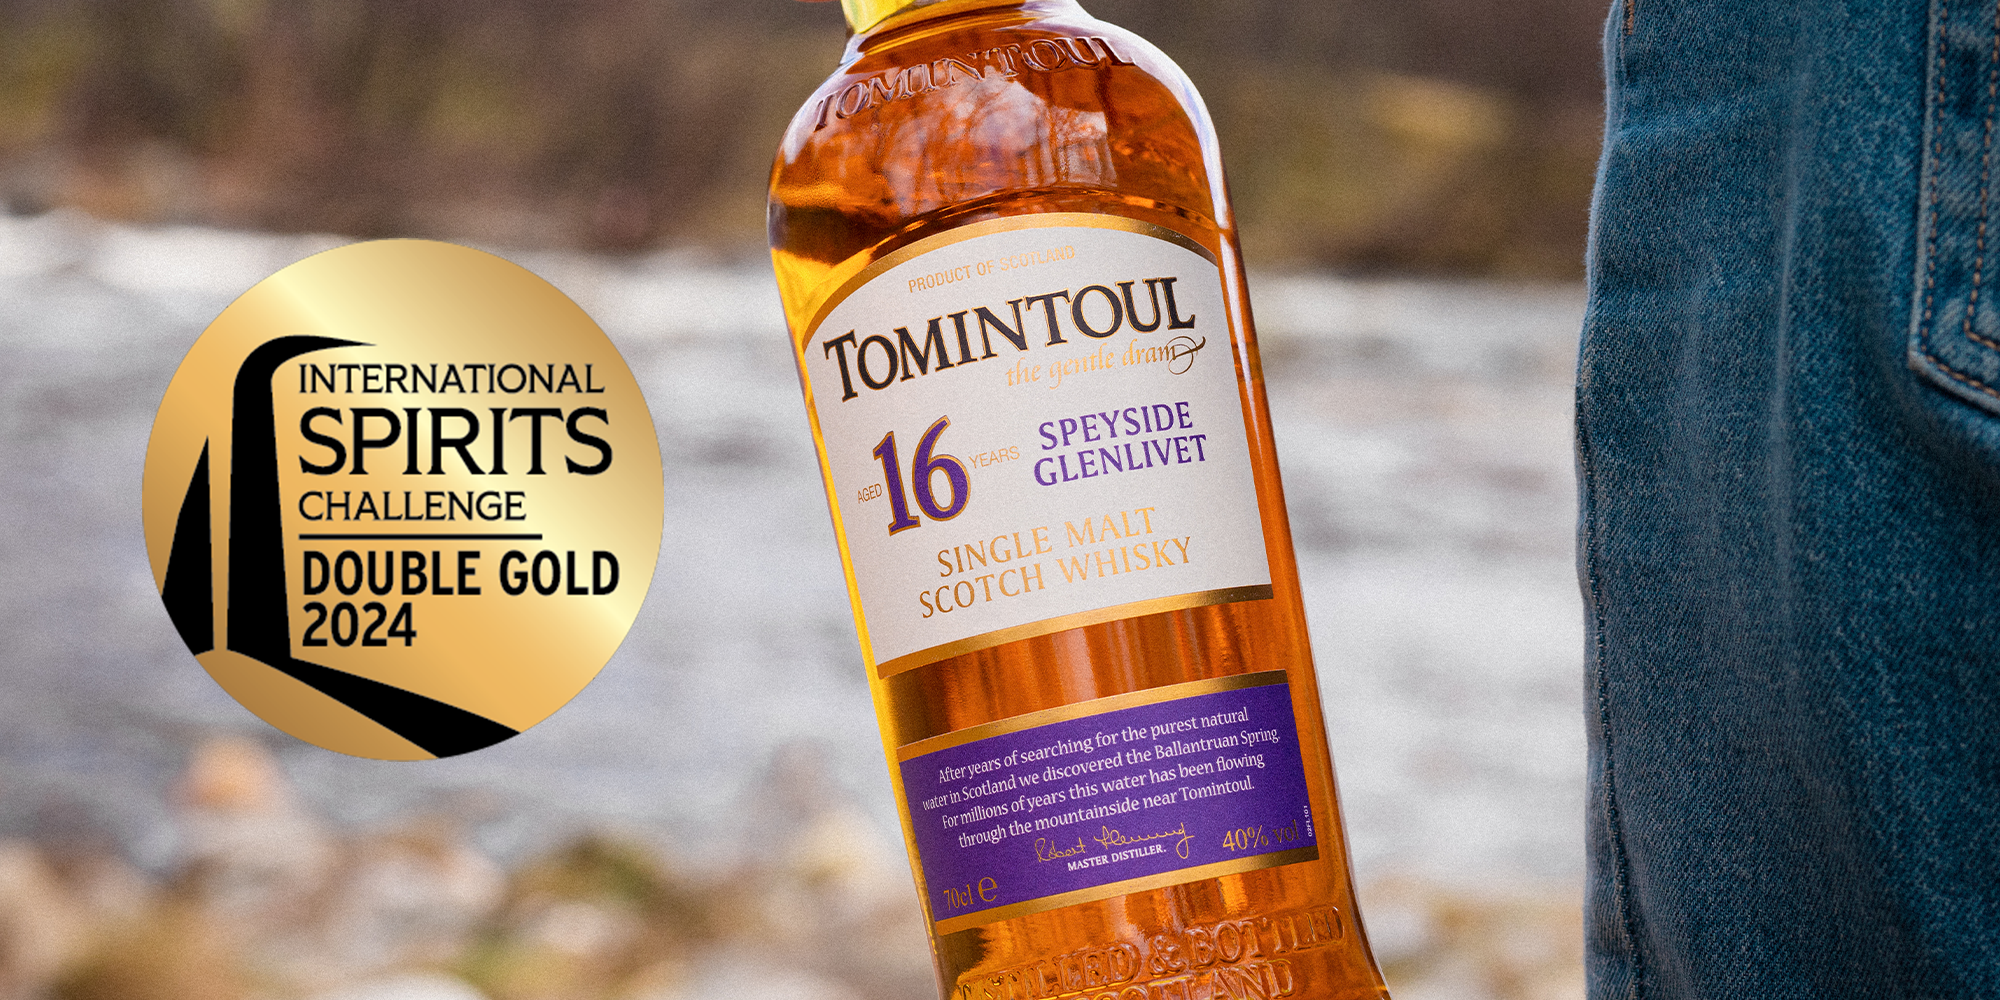 Tomintoul takes home Double Gold and Gold medals at 2024 International Spirits Challenge